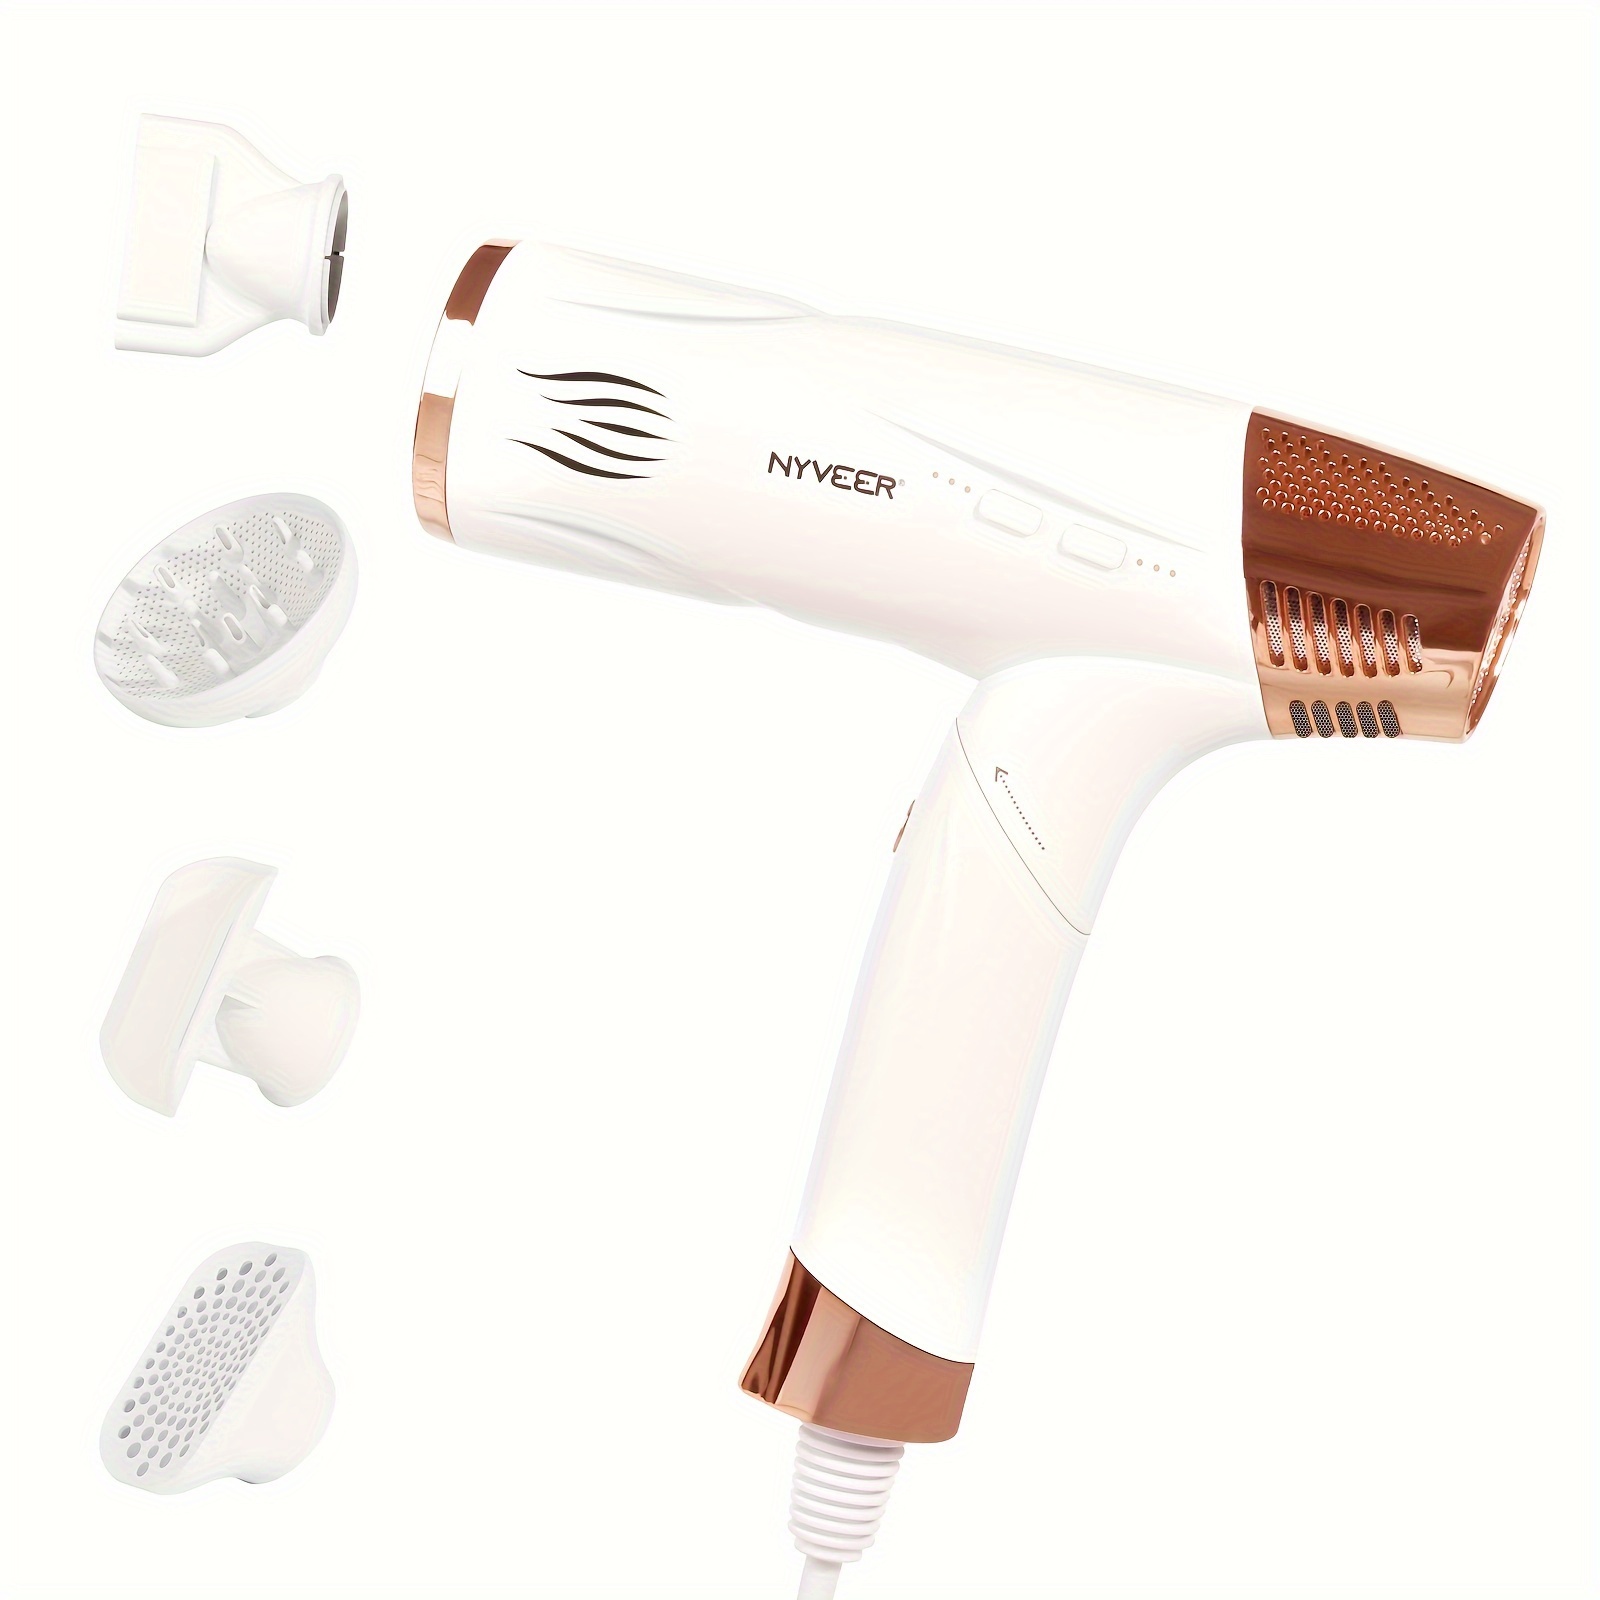 

Hair Dryer, 1800w Ionic Hair Dryer, Travel Blow Dryer Foldable Handle, 110000rpm High-speed Brushless Motor For Fast Drying, Blow Dryer With Auto-cleaning, Lightweight.